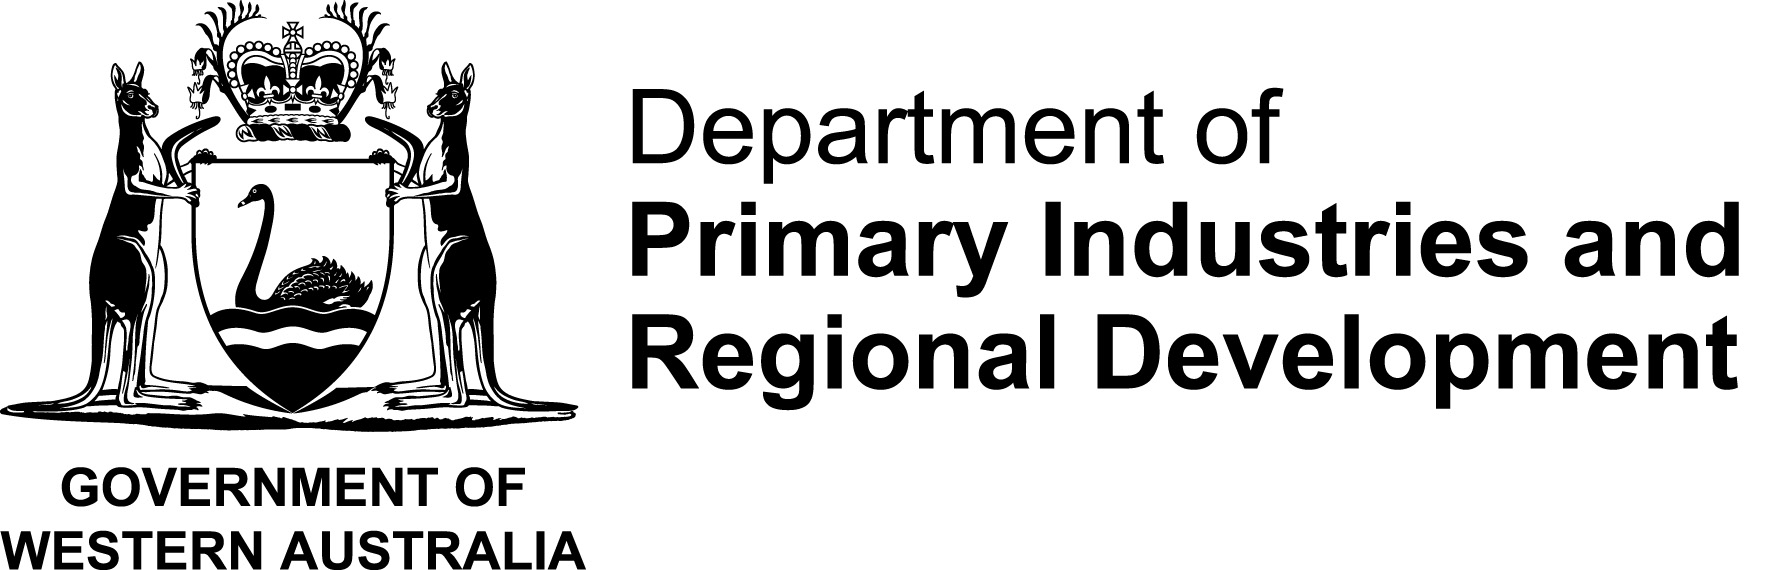 Department of Primary Industries and Regional Development logo